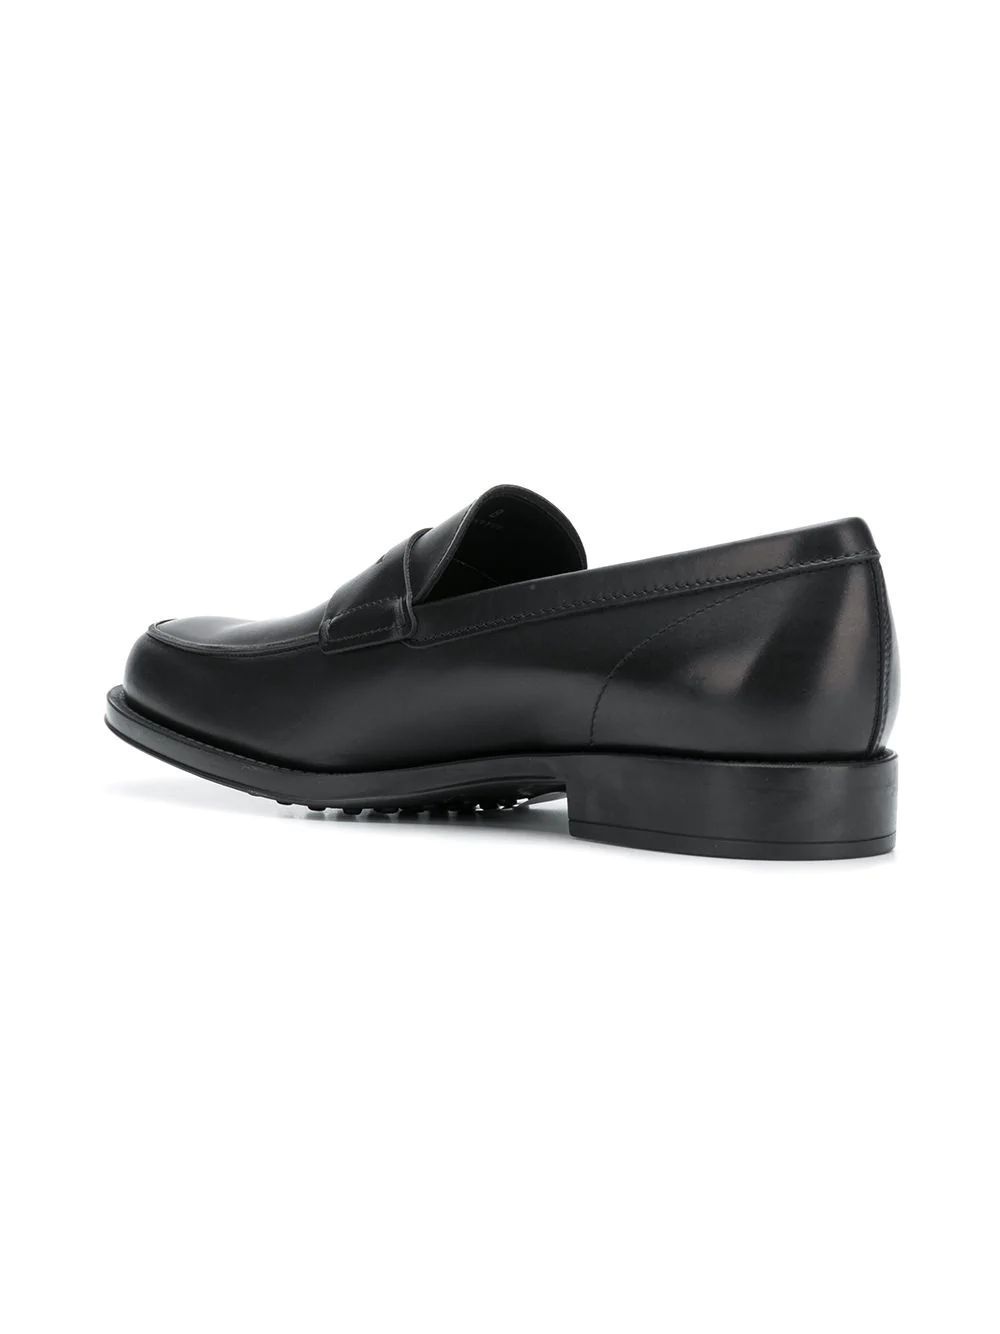 LOAFERS TOD'S, LEATHER 100%, color BLACK, Rubber sole, Heel 20mm, SS20, product code XXM0UD00640D90B999